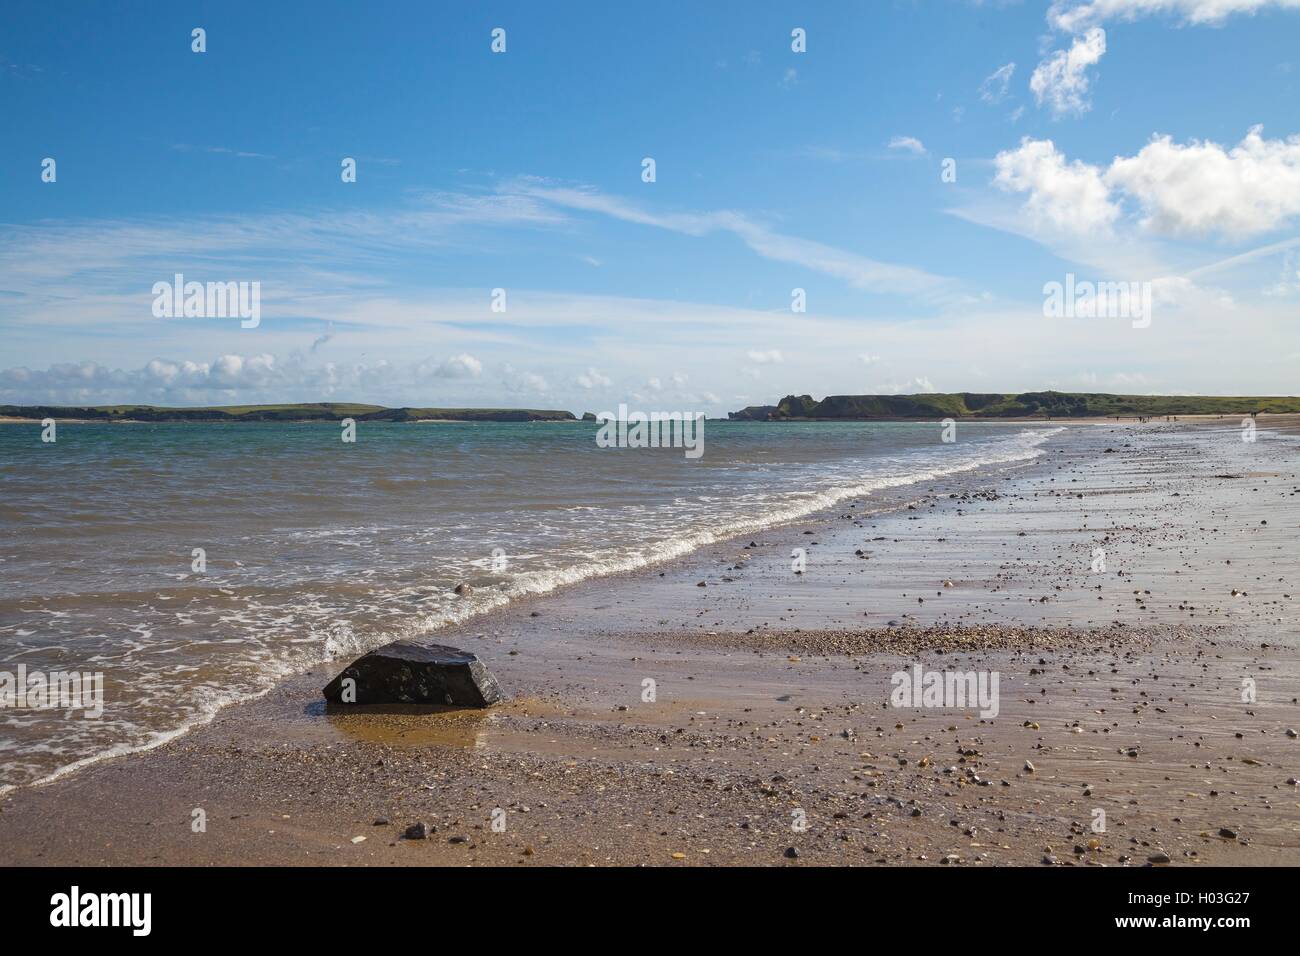 The beach at Tenby, Wales, Great Britain Stock Photo